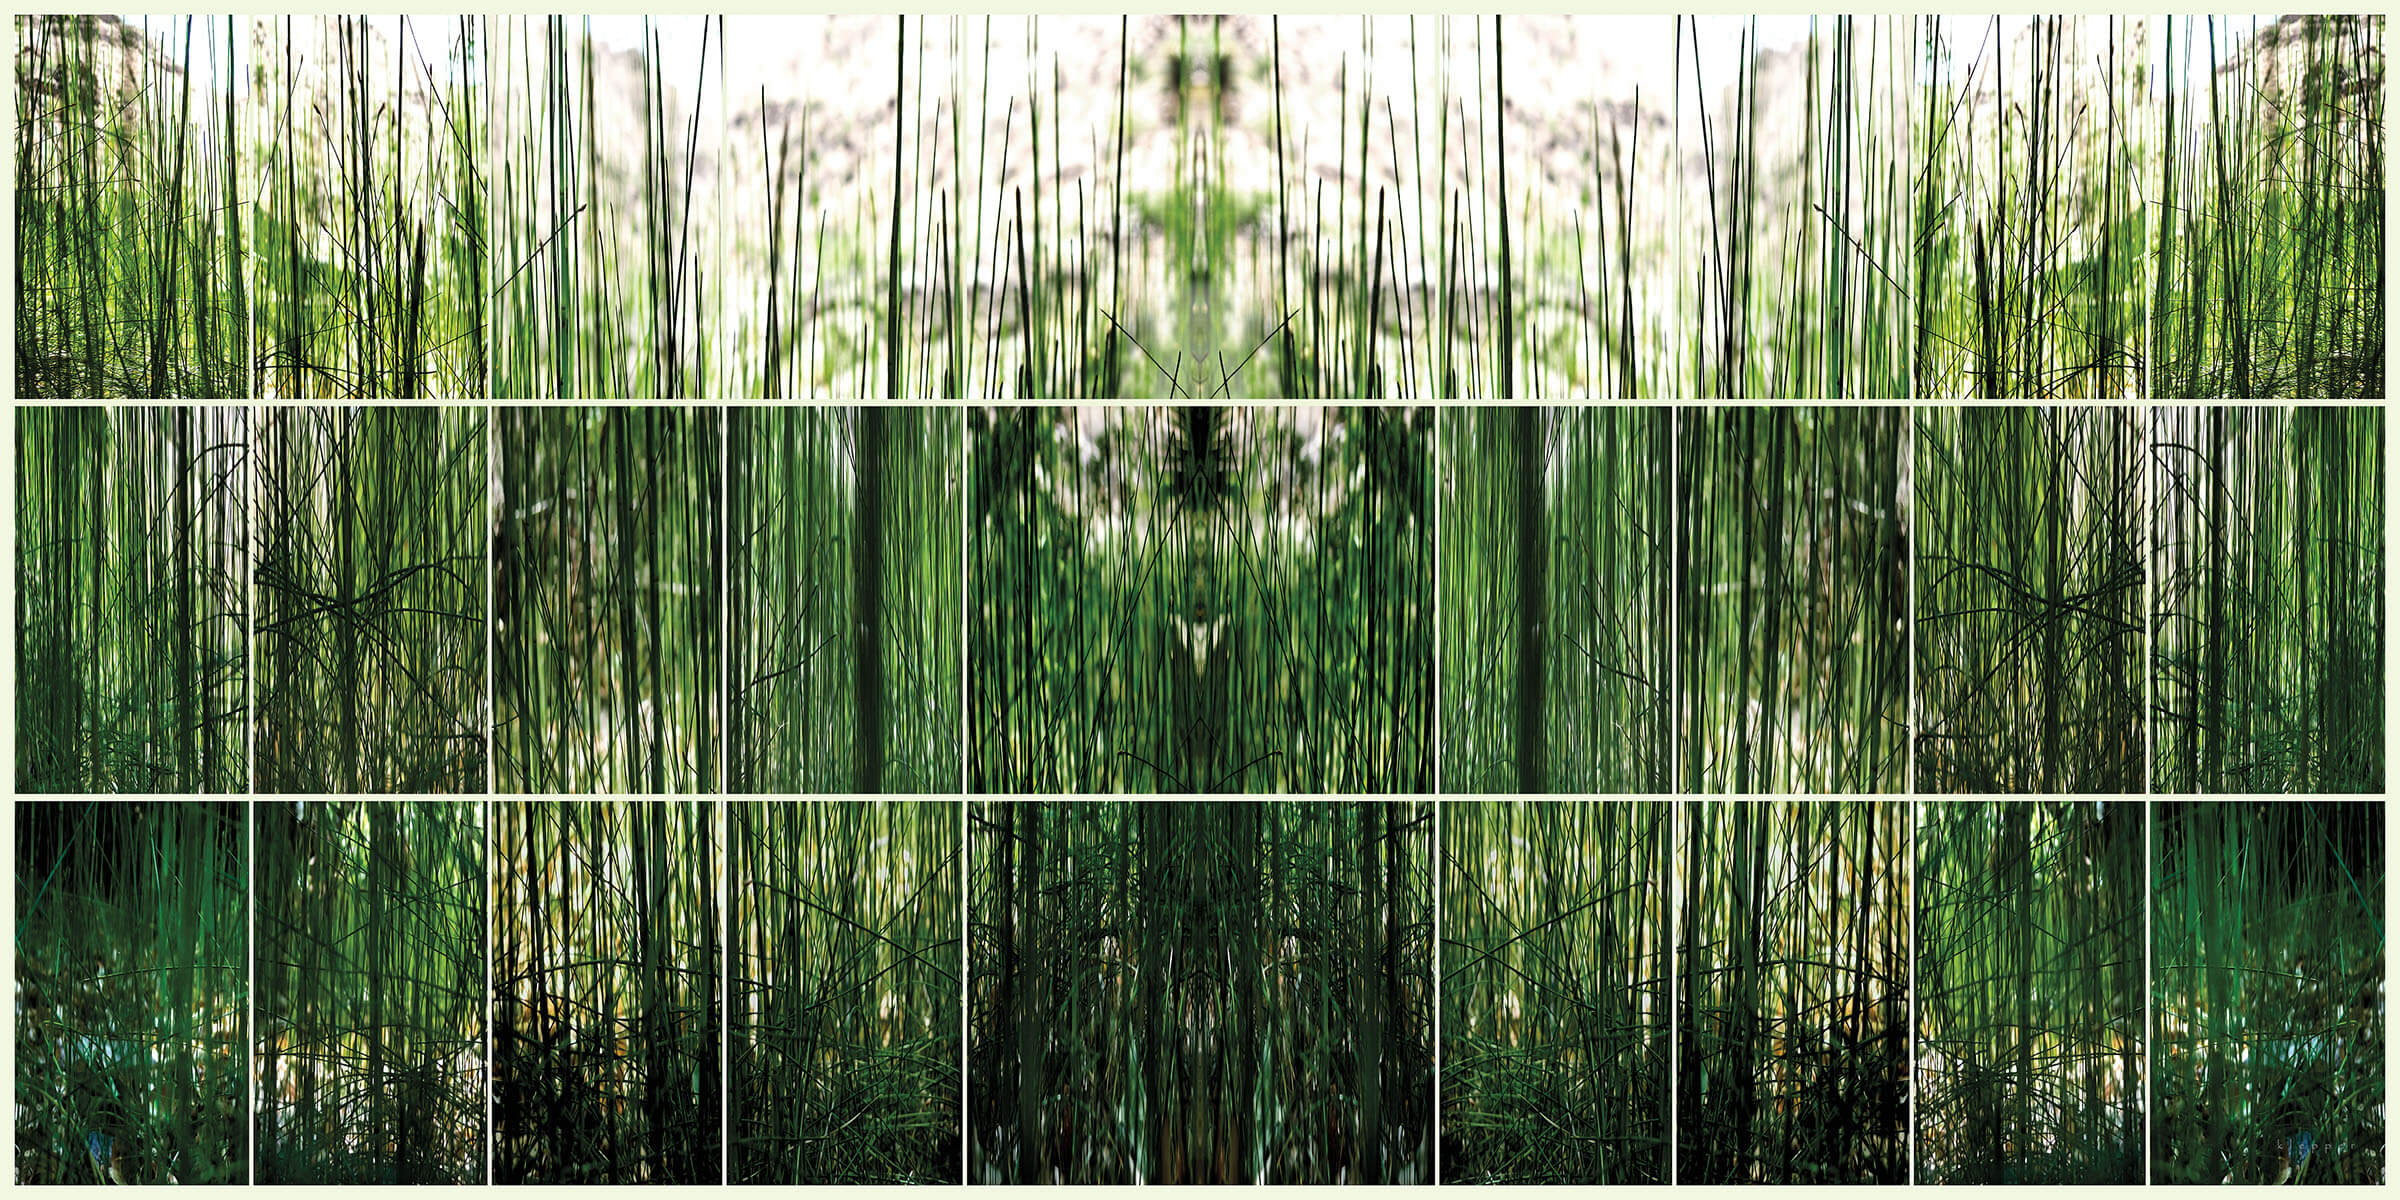 A composite image of various scenes of green grasses and light